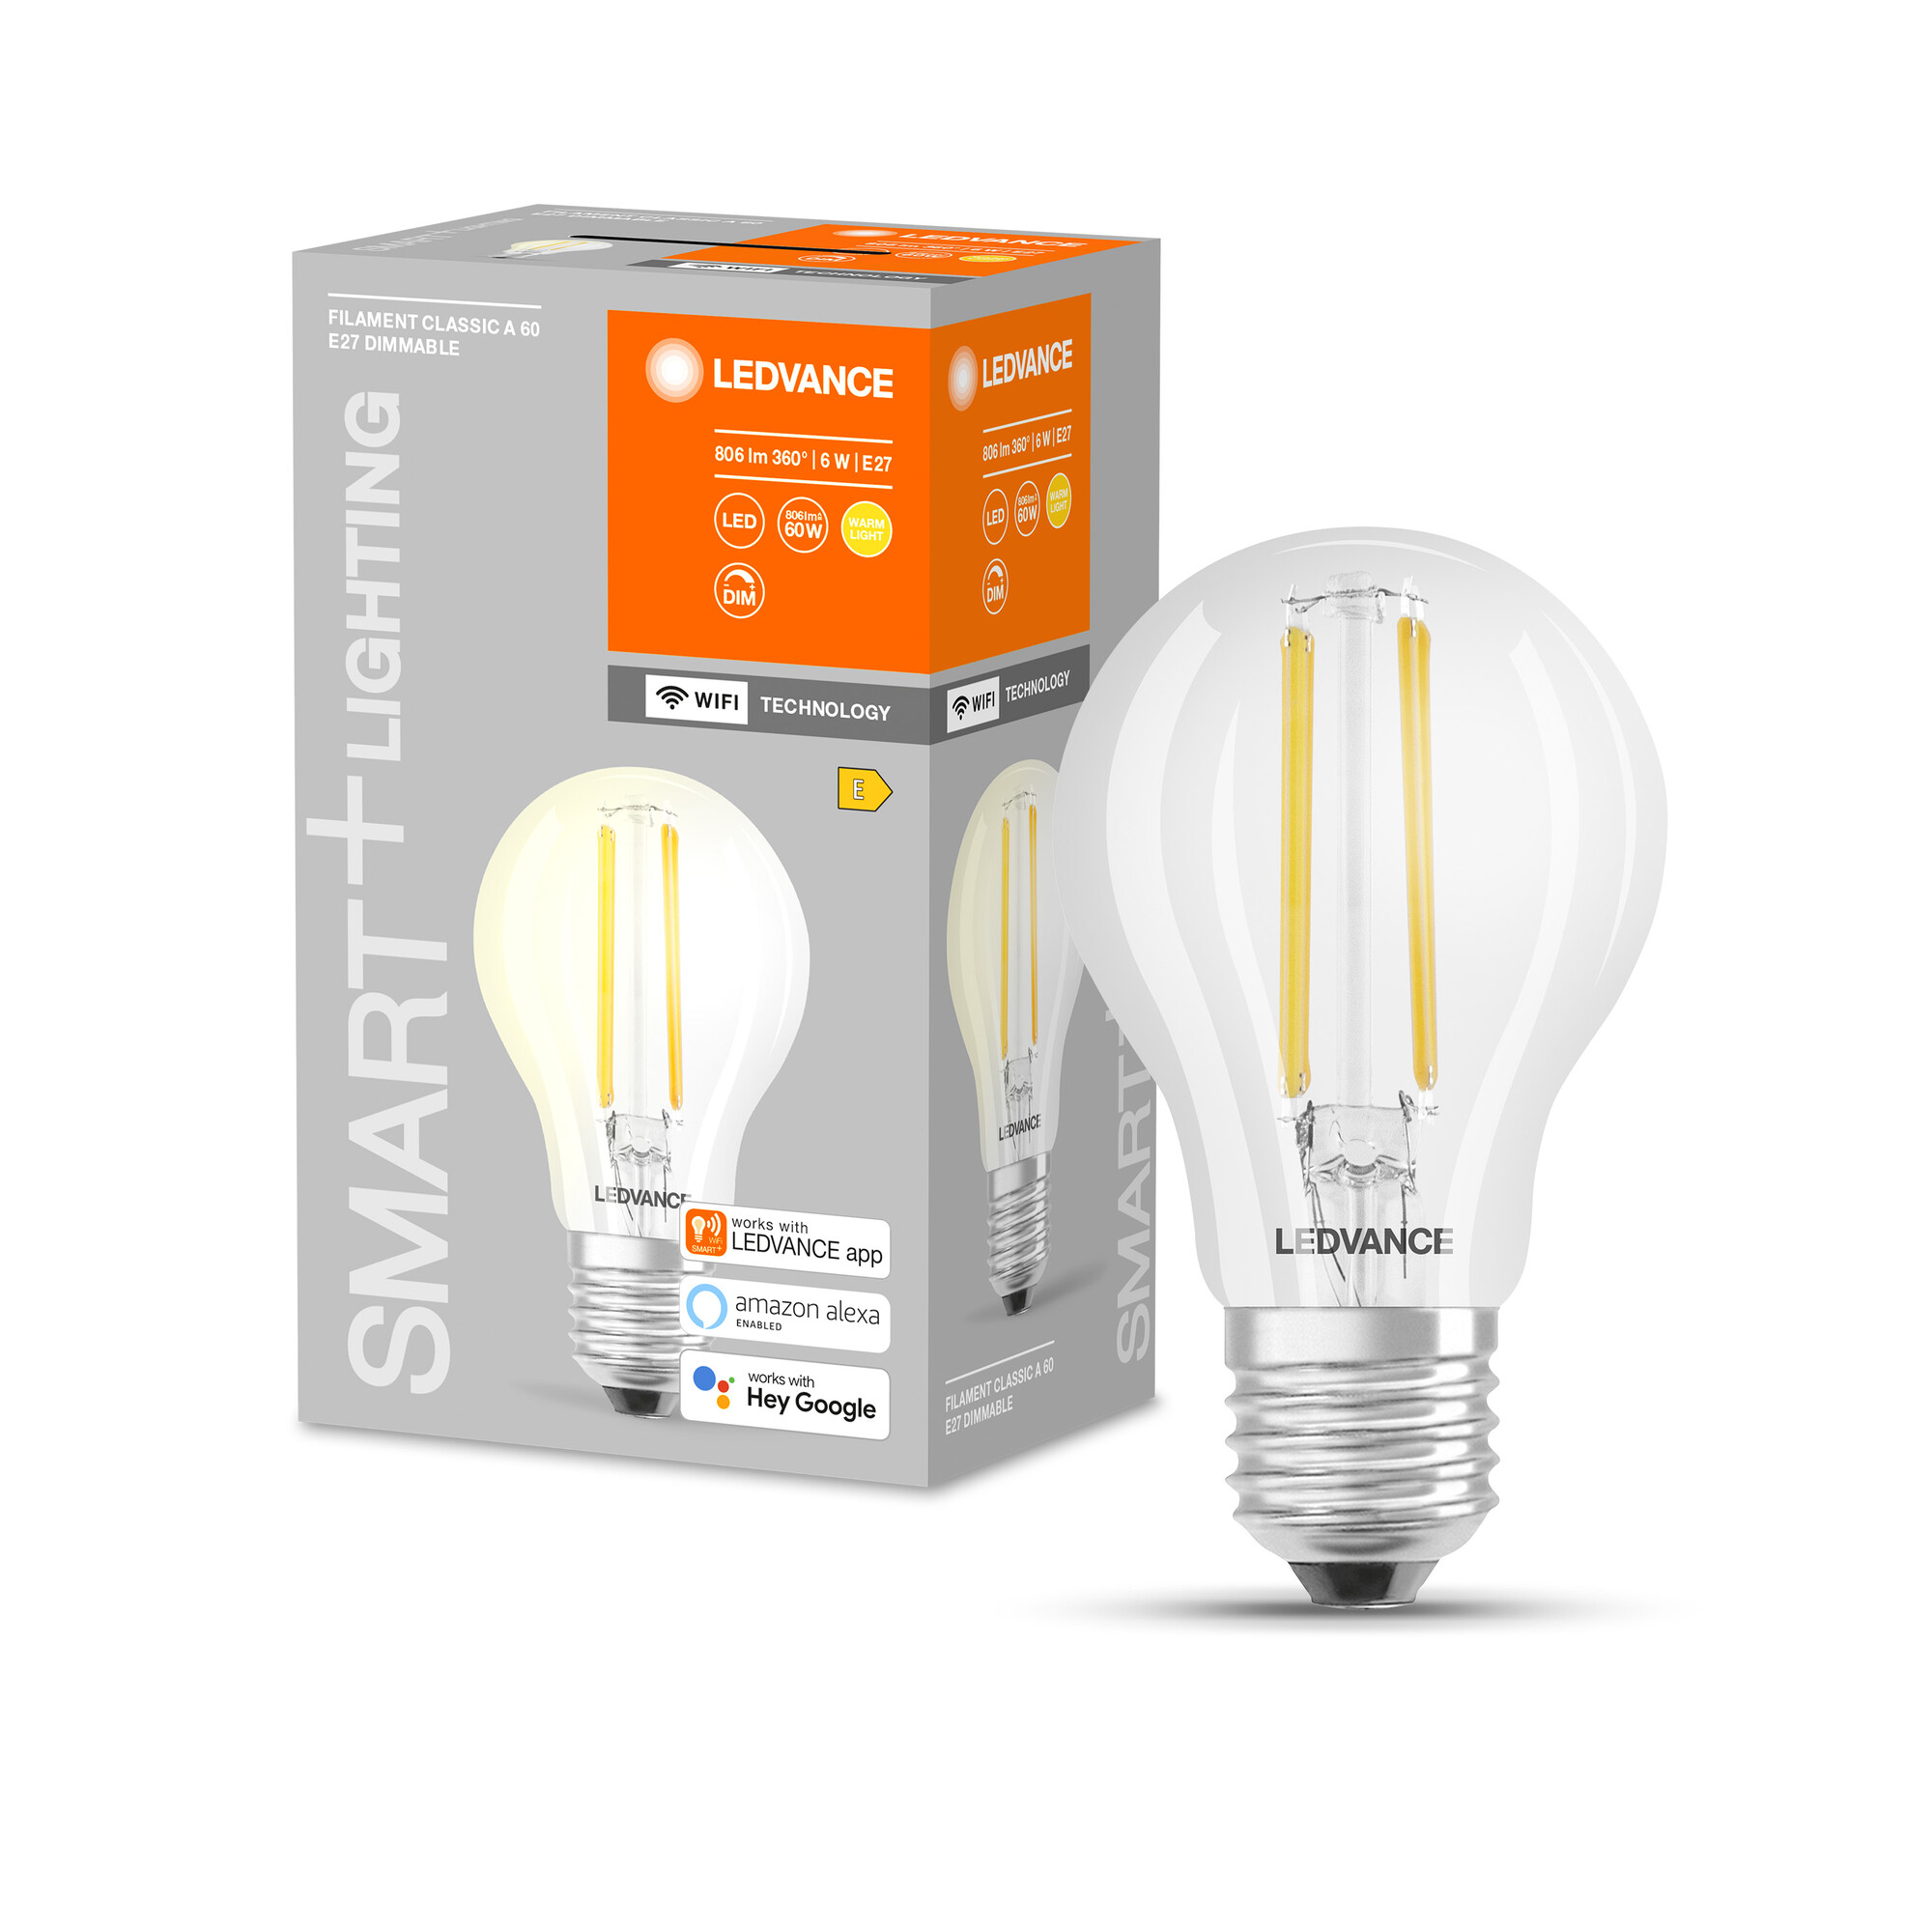 LED-Filament Lampe 'Smart+ WiFi CLA' warmweis 6 W E27 806 lm, dimmbar + product picture